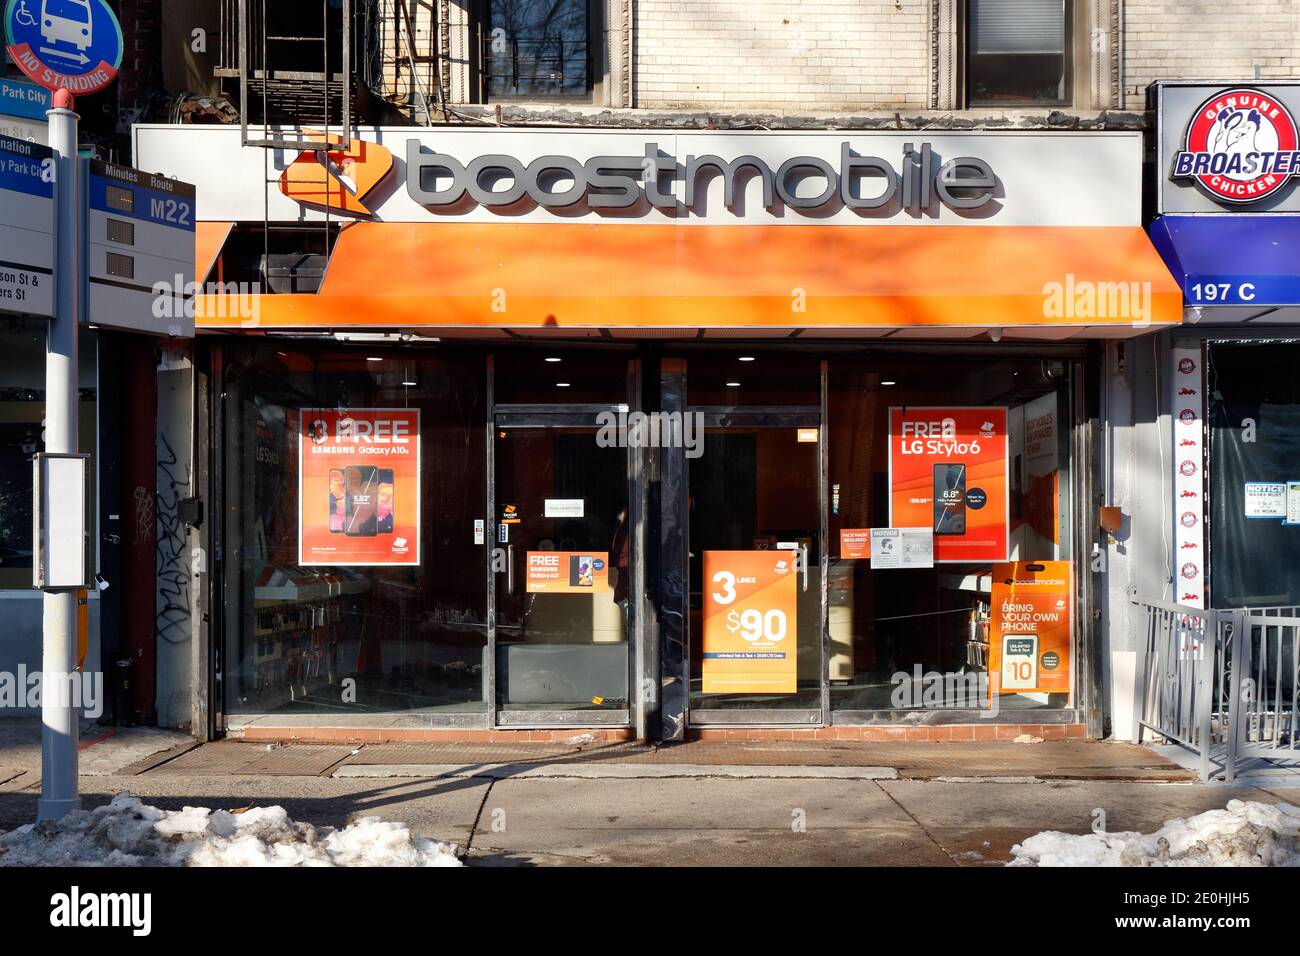 Boost Mobile, 197D Madison St, New York, NYC storefront photo of a cellphone service store in the Lower East Side neighborhood of Manhattan. Stock Photo